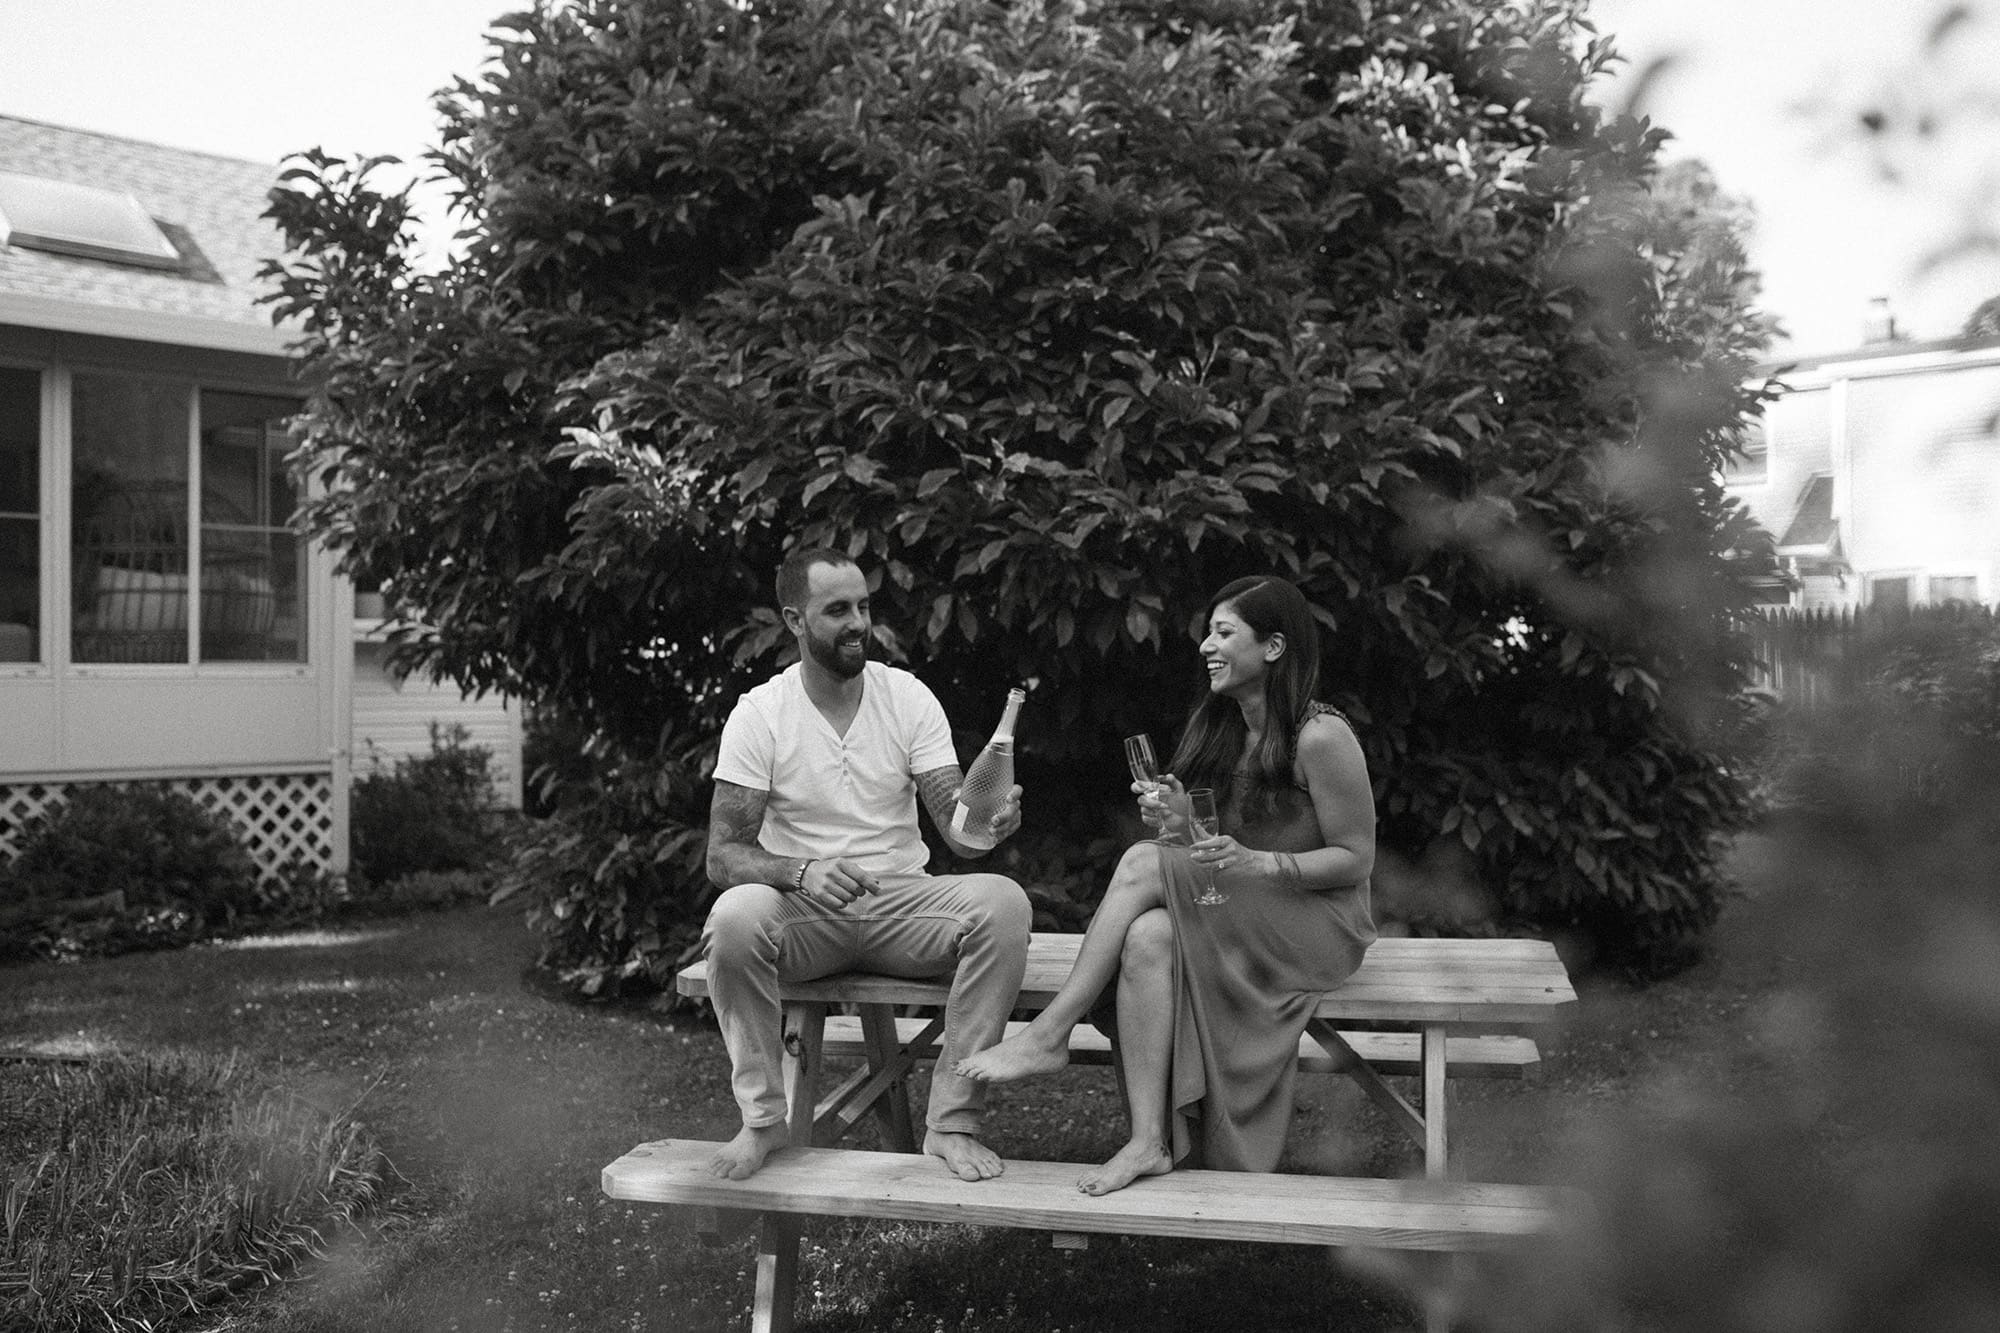 couple drinking wine at a picnic table engagement photoshoot black and white